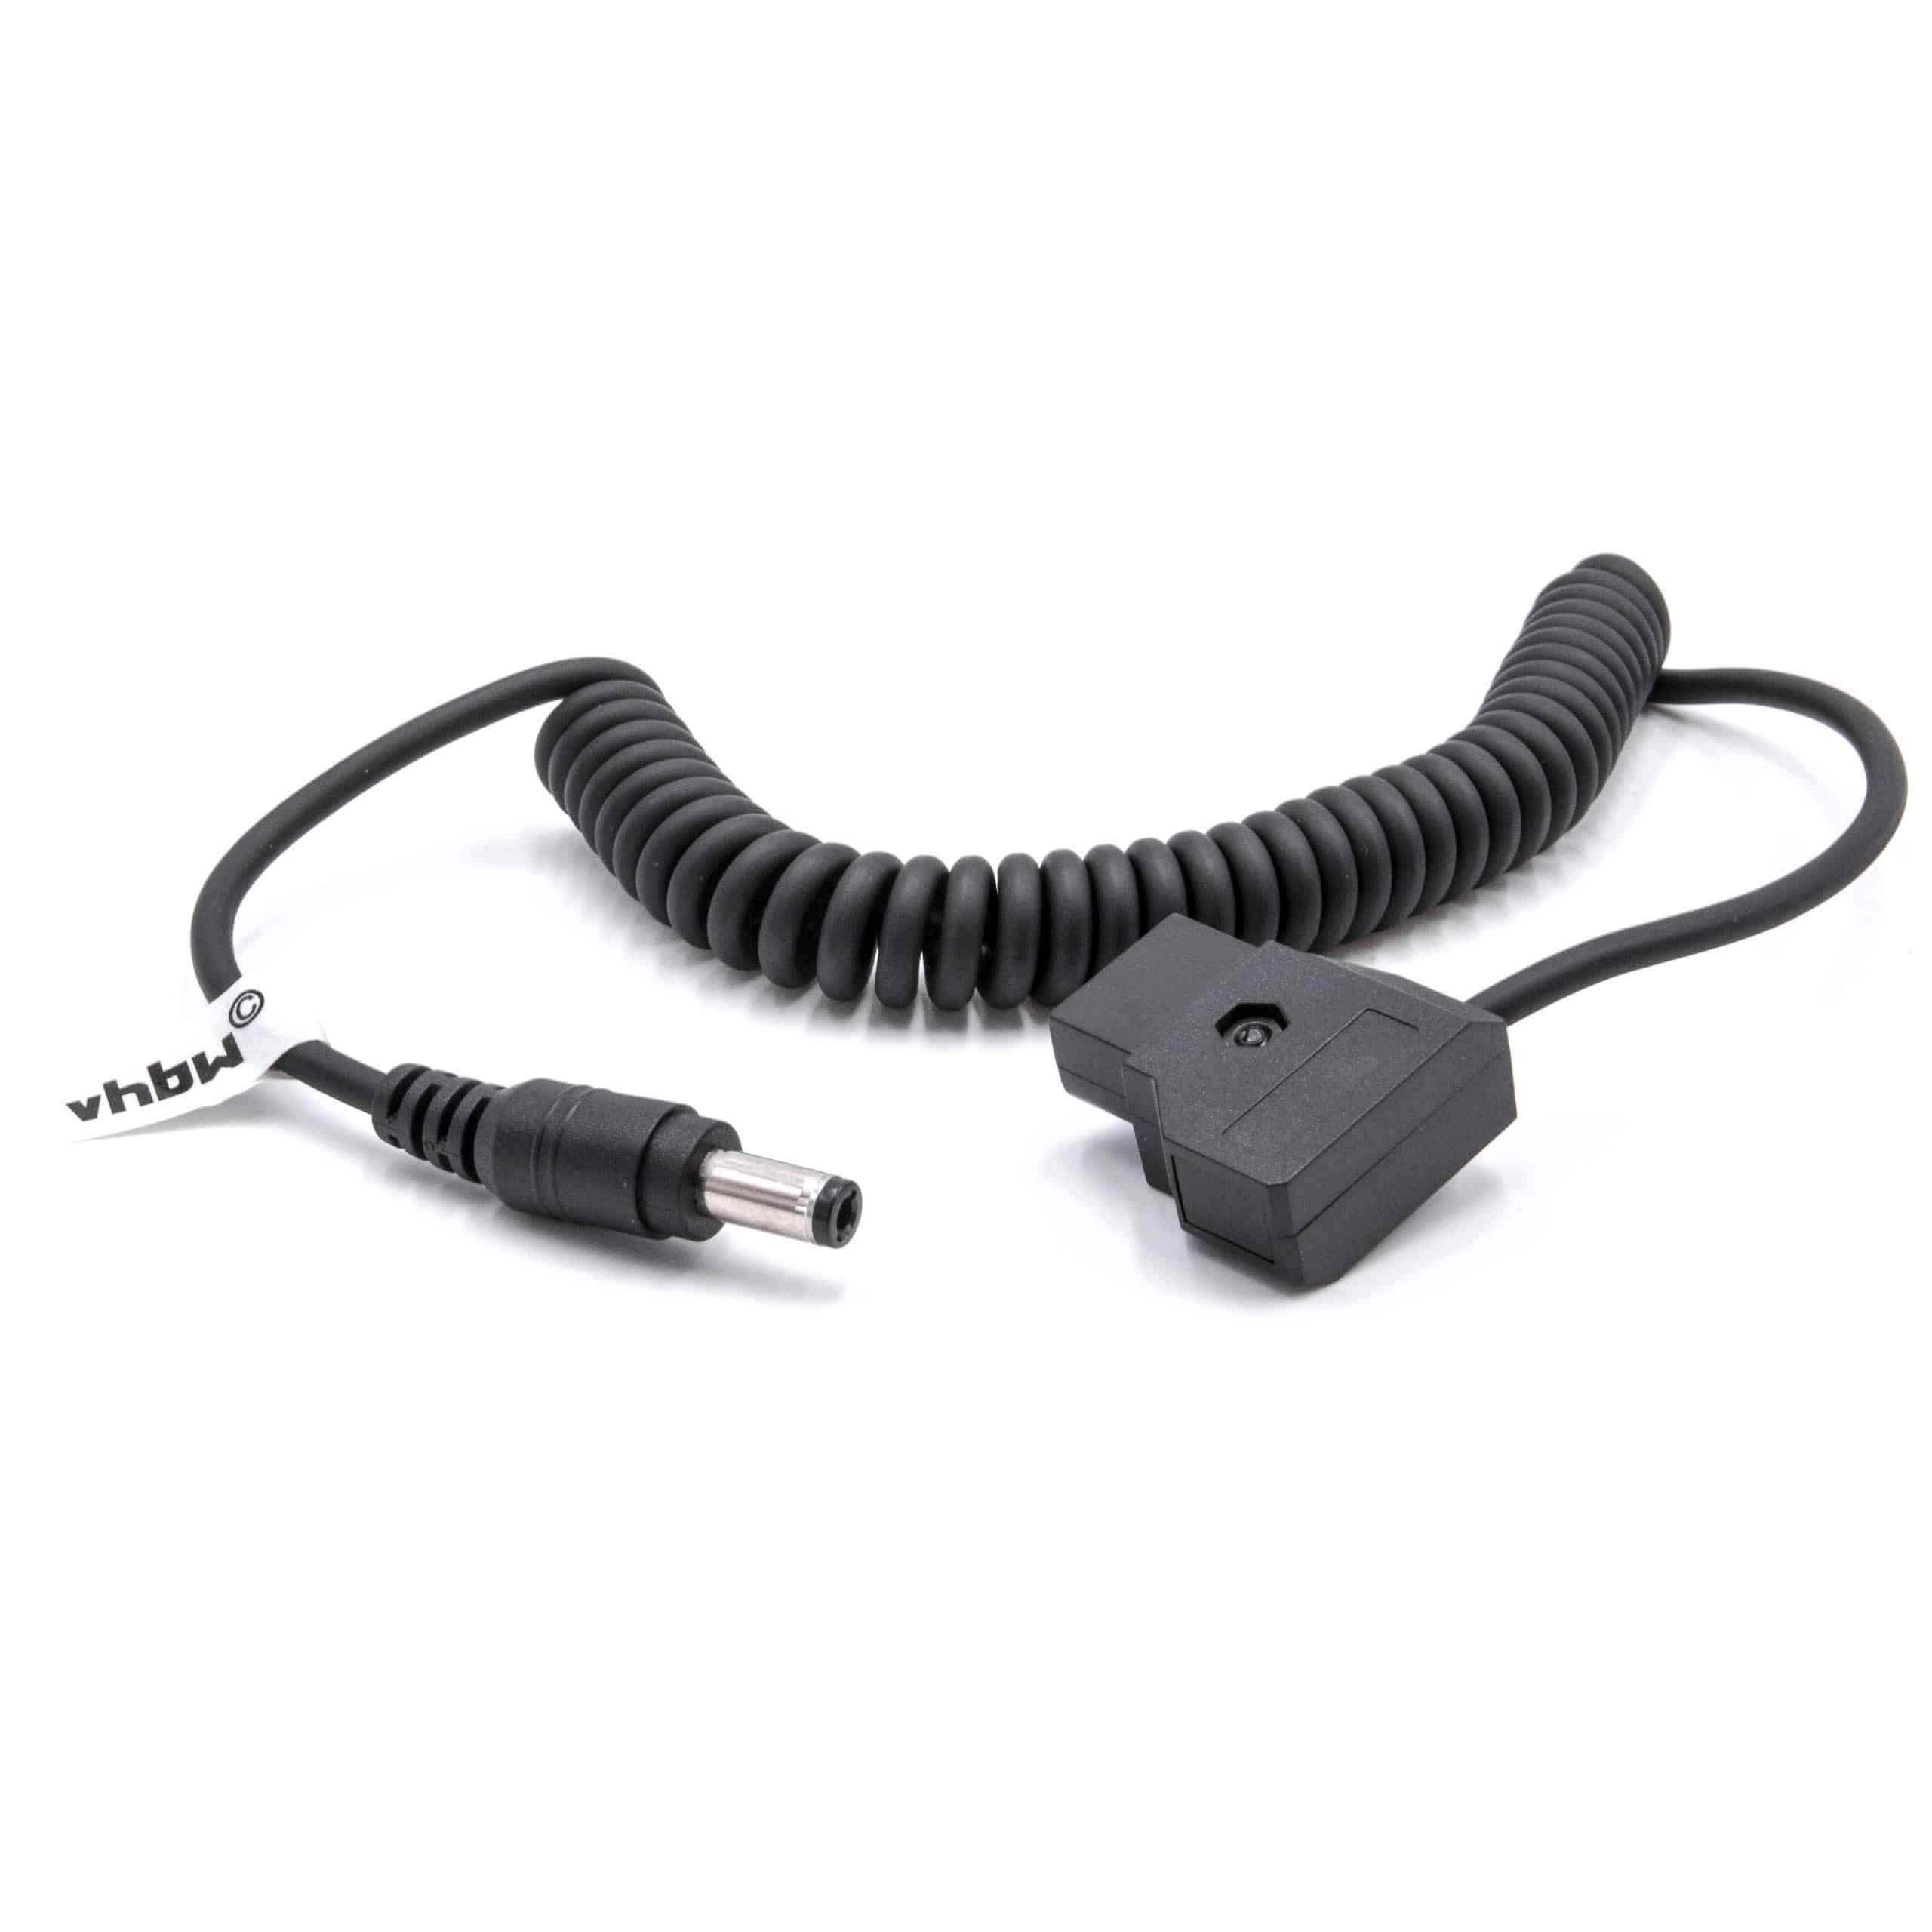 Adapter Cable D-Tap (male) to LED Power Supply suitable for Anton Bauer Dionic, D-Tap Camera - Black